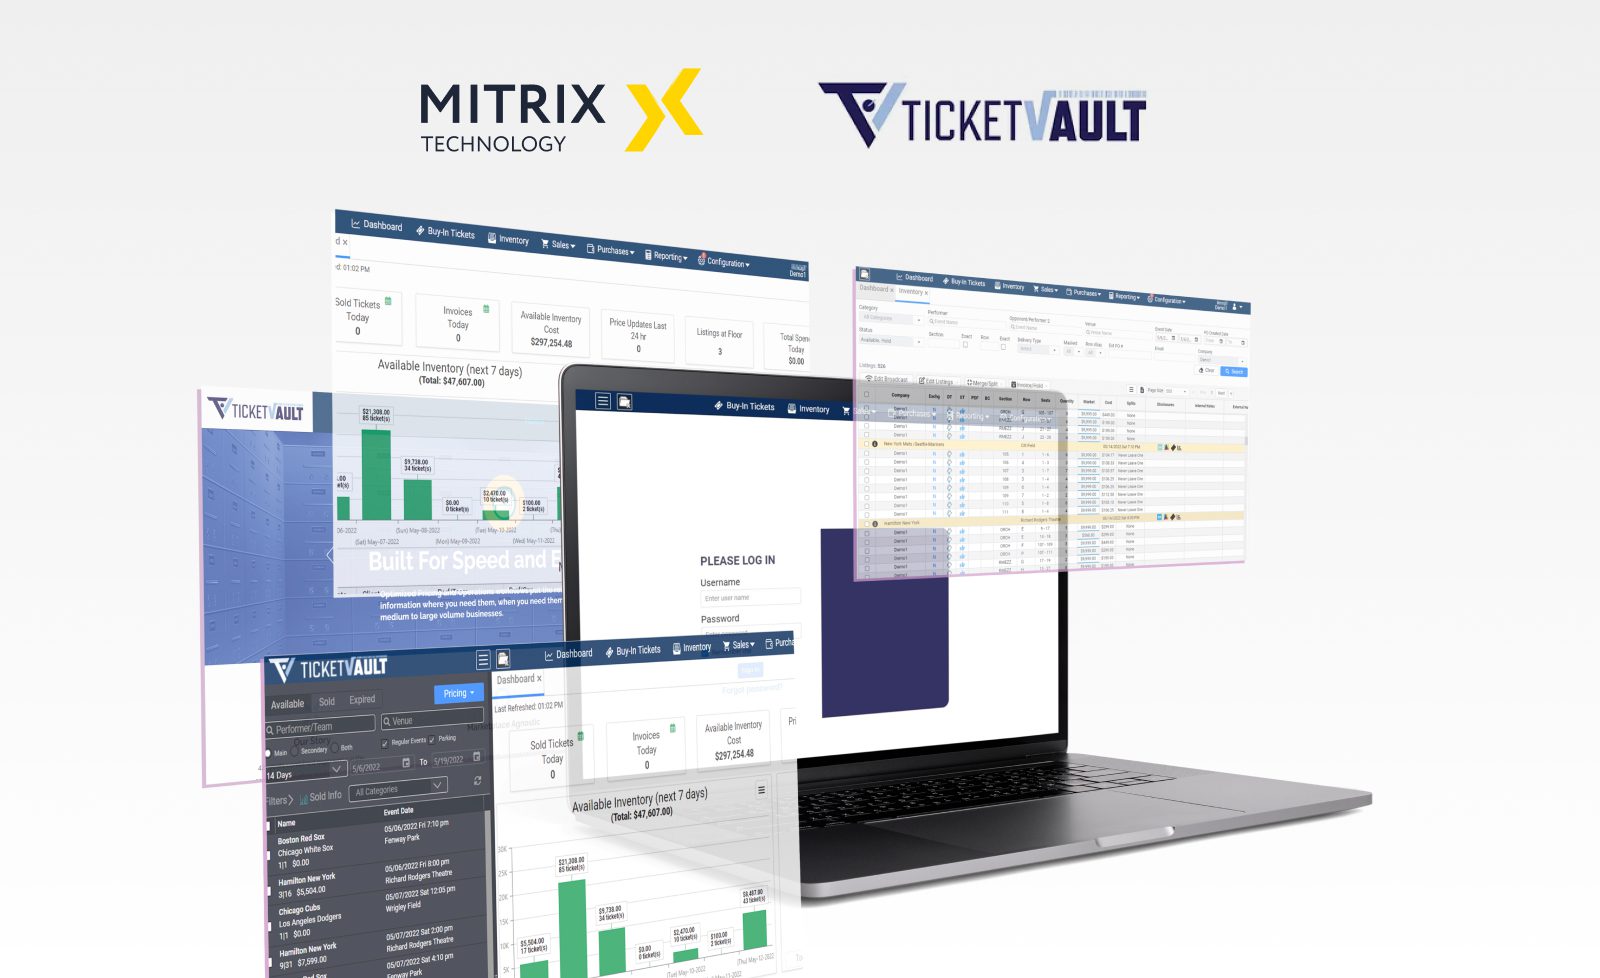 An all-in-one online platform to help brokers sell and manage tickets